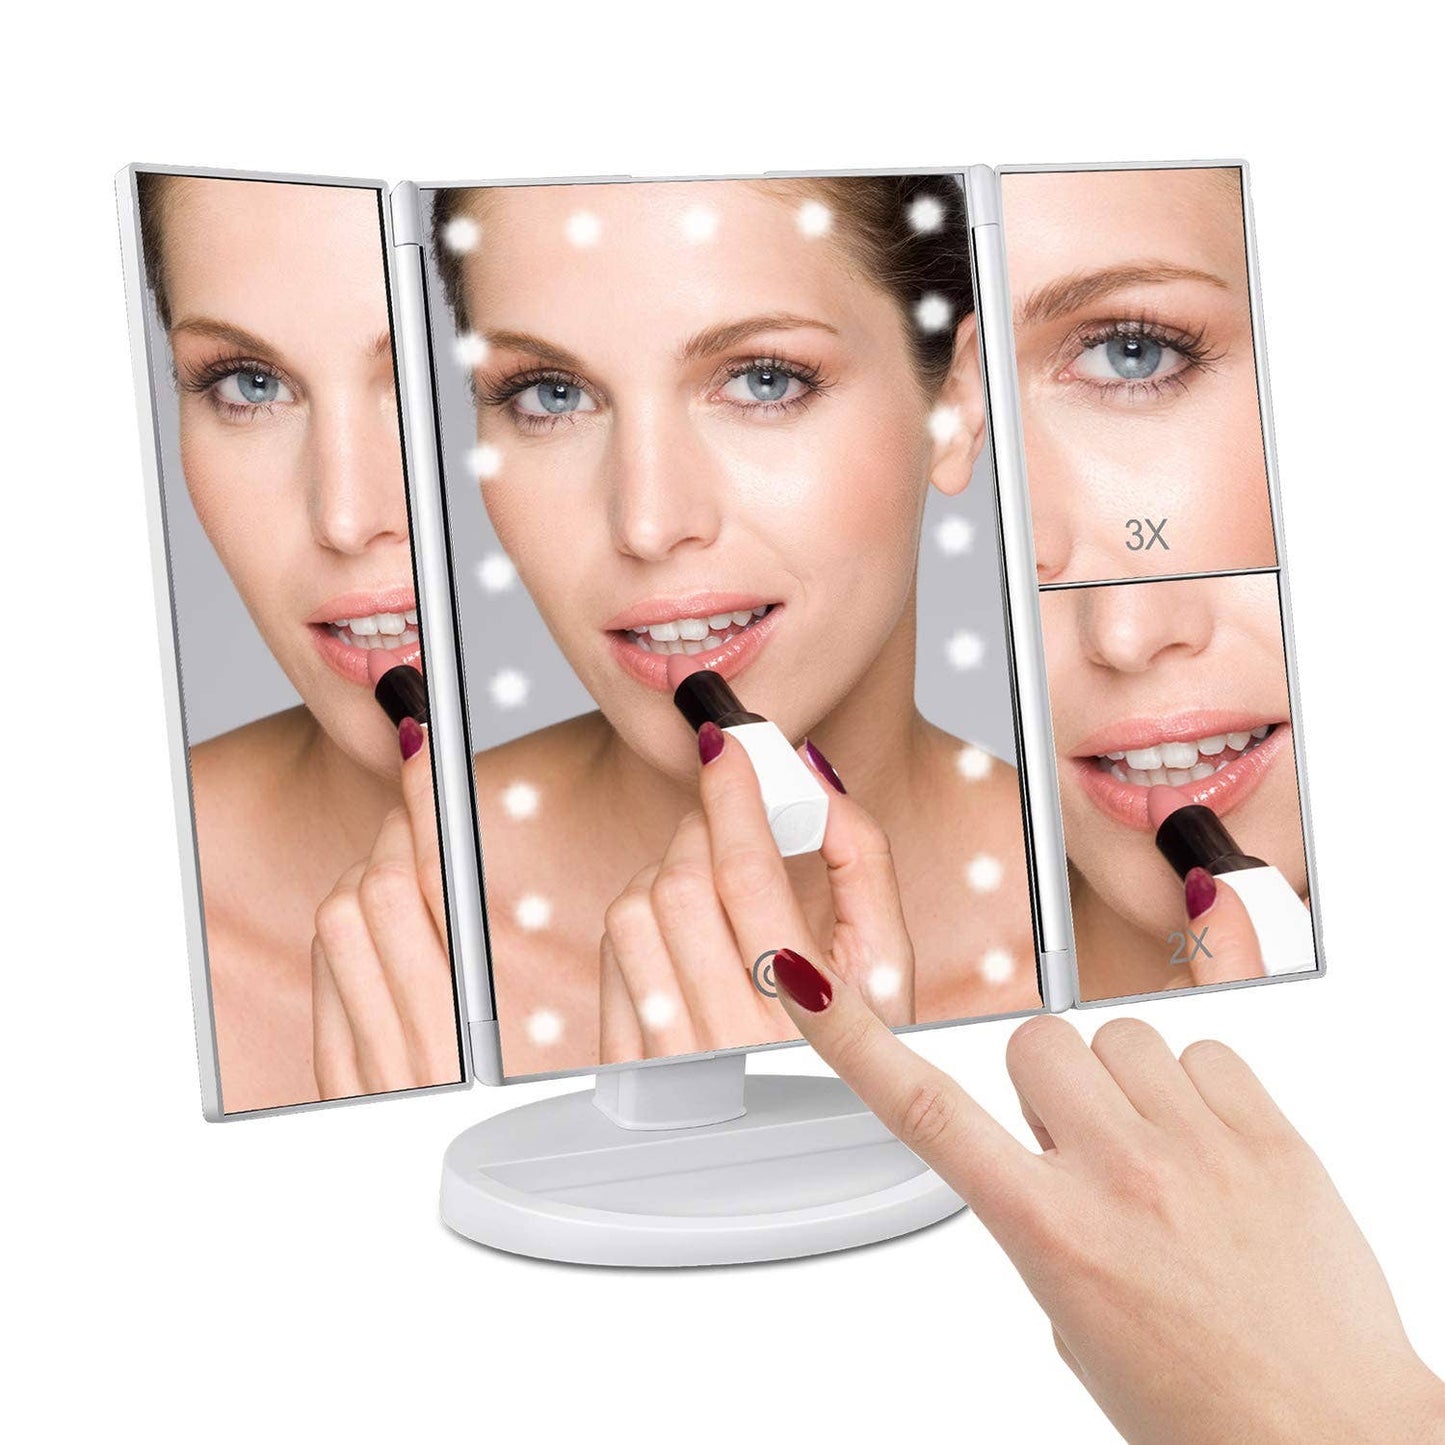 NIB - Trifold Make-up Mirror with USB or Battery lights 21 LED Lights